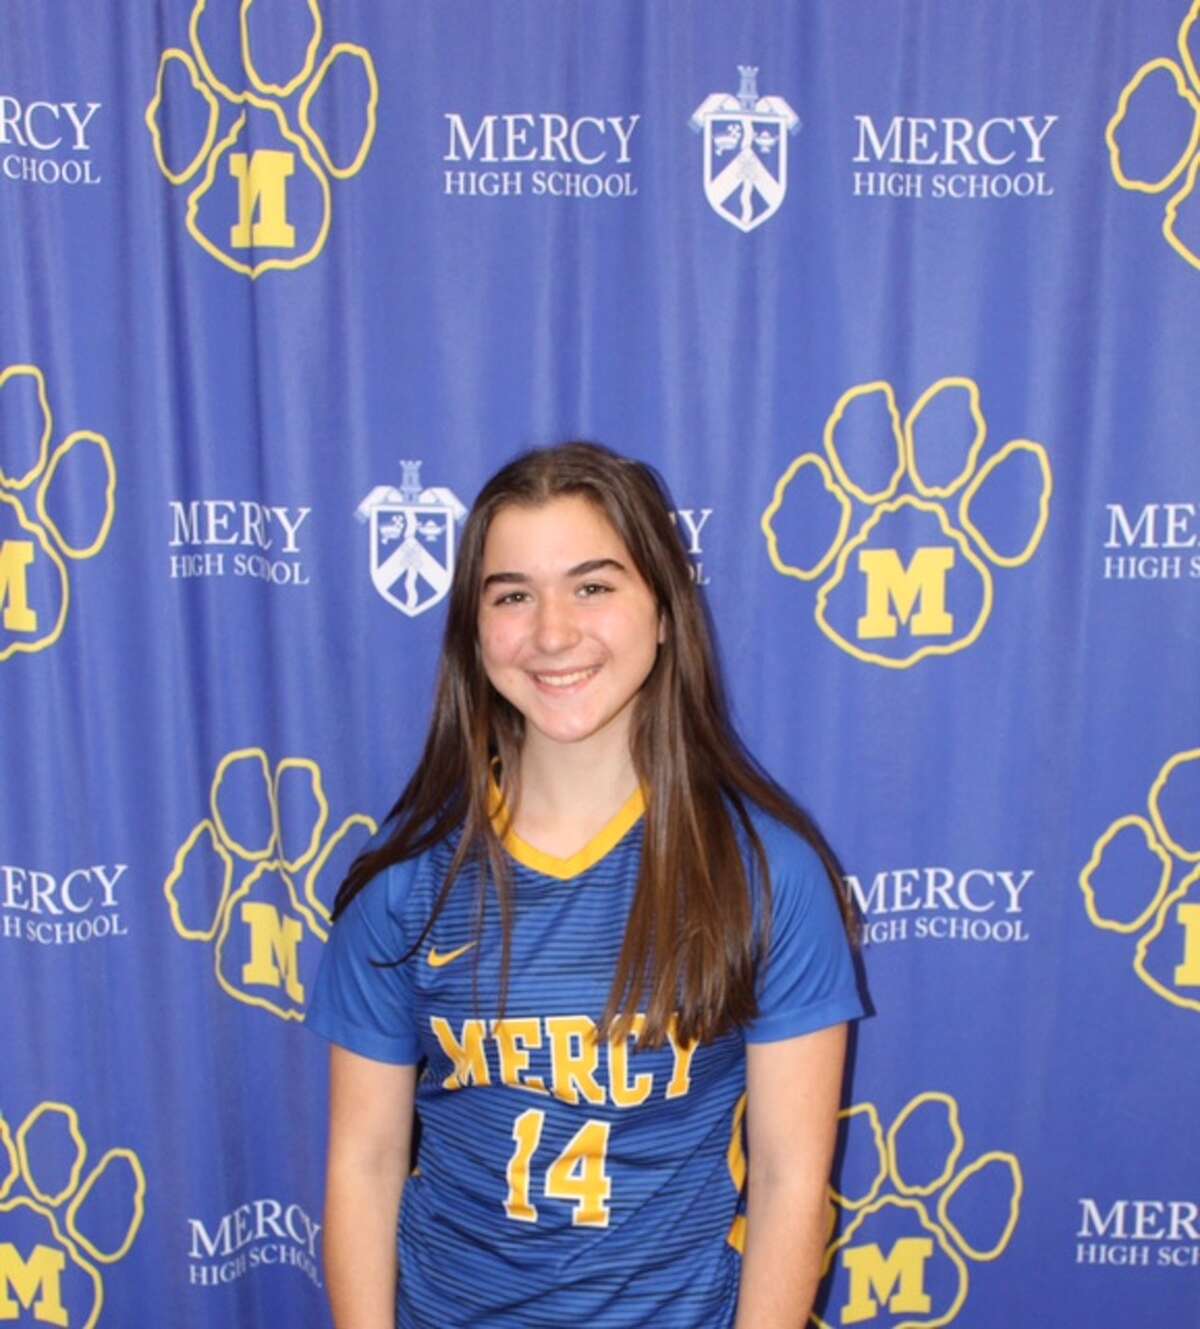 Kate Donlan has helped lead Mercy to an unbeaten record. Mercy is the reigning SCC champion.